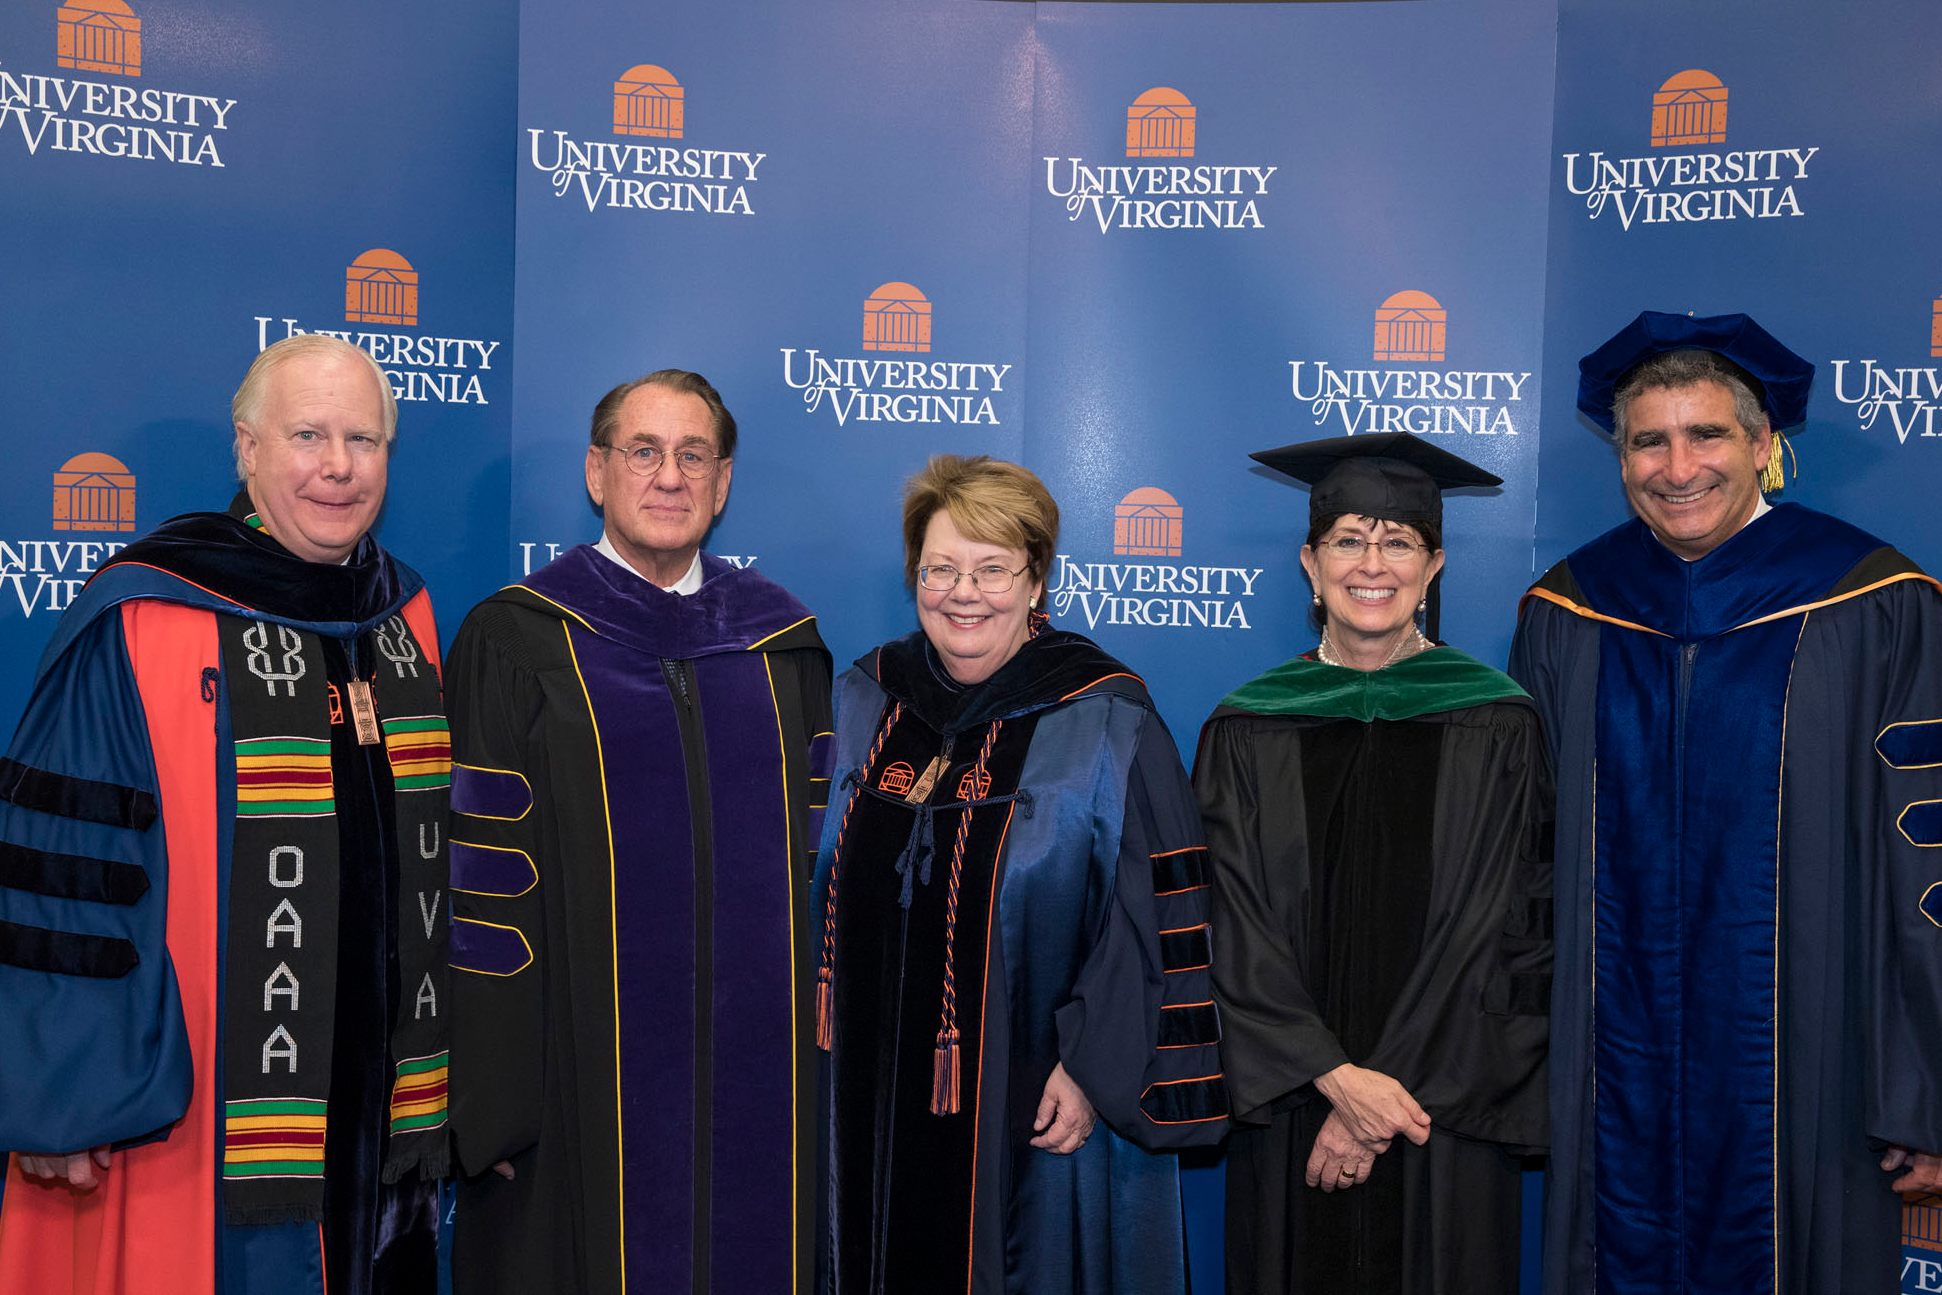 President Teresa Sullivan, center, is flanked by John Jeffries and Karen Rheuban, with Rector Frank “Rusty” Conner III, left, and Provost Thomas Katsouleas